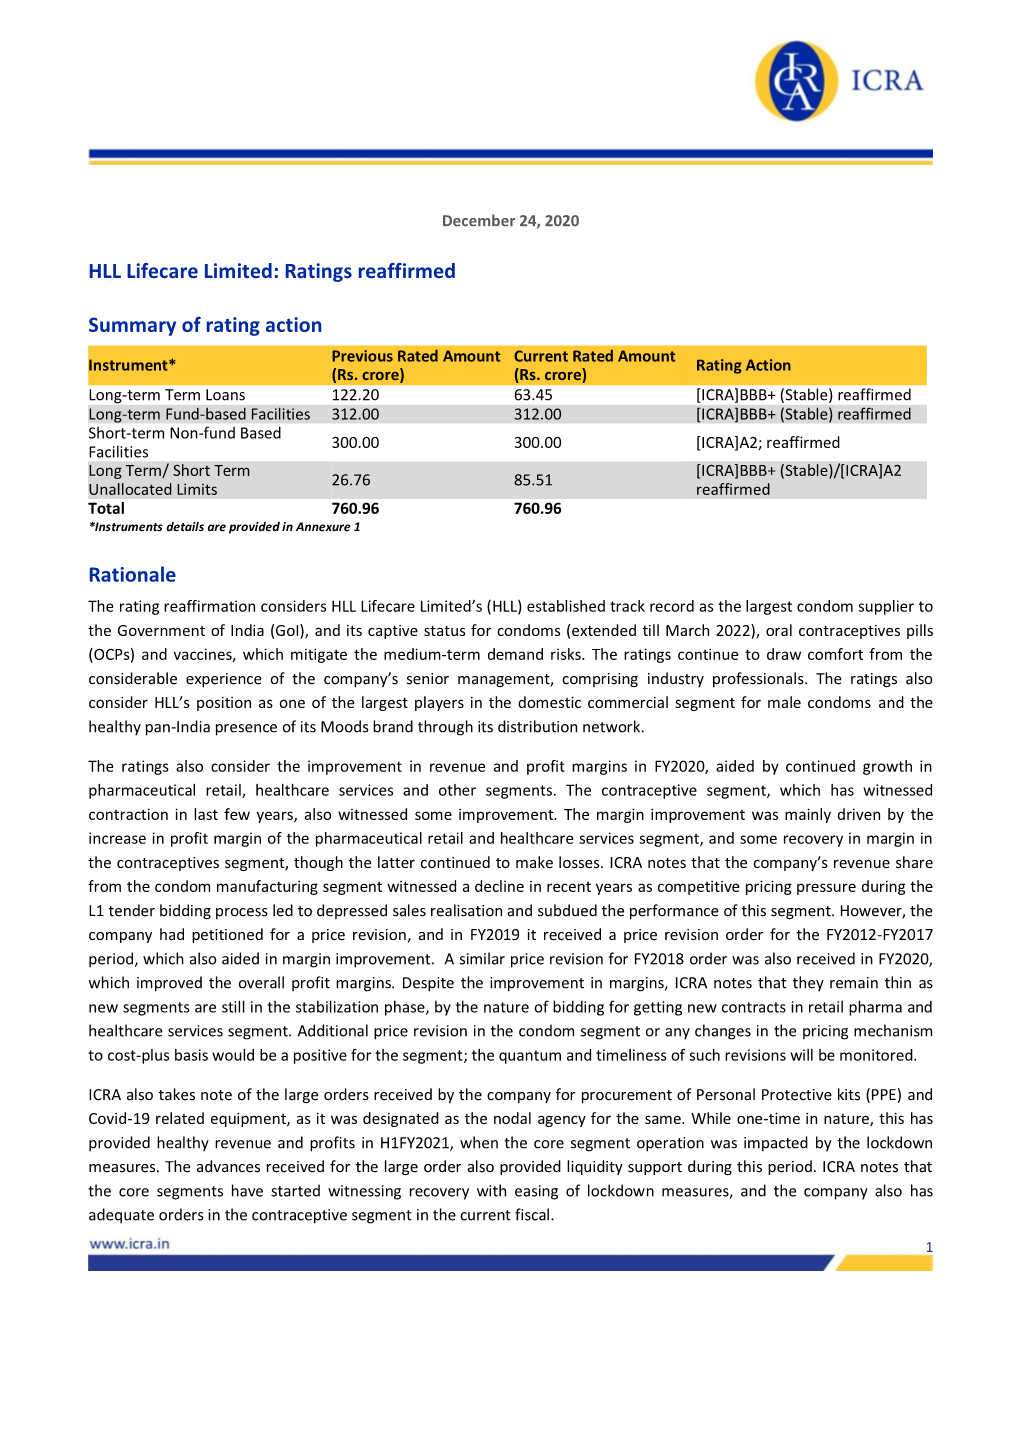 HLL Lifecare Limited: Ratings Reaffirmed